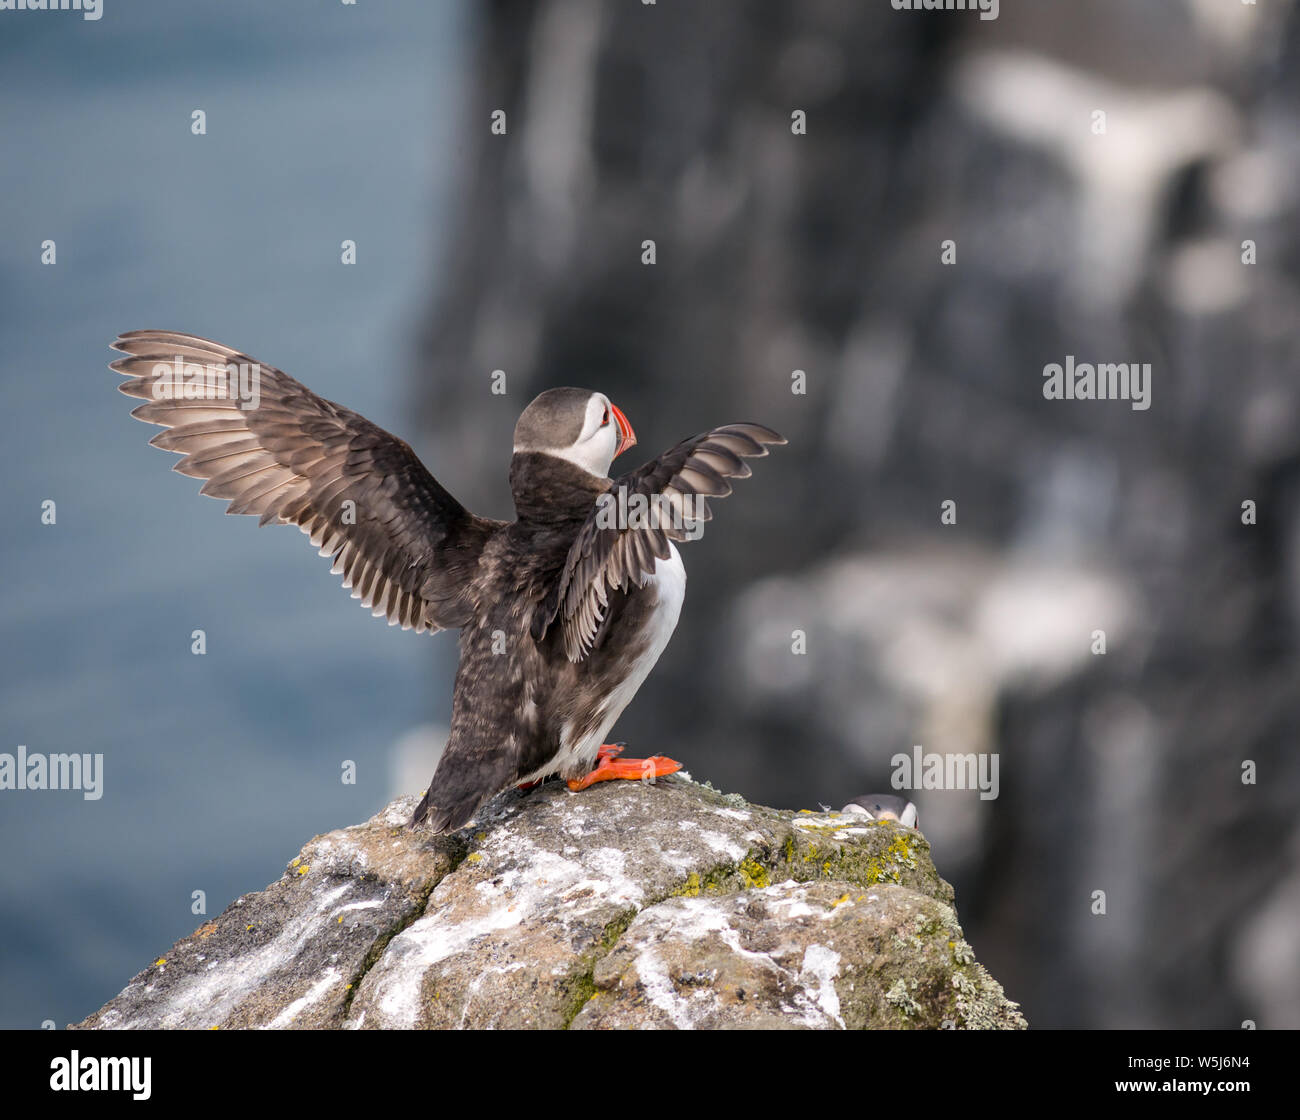 Atlantic puffin, Fratercula arctica, with outstretched wings on cliff ledge, Isle of May, Scotland, UK Stock Photo